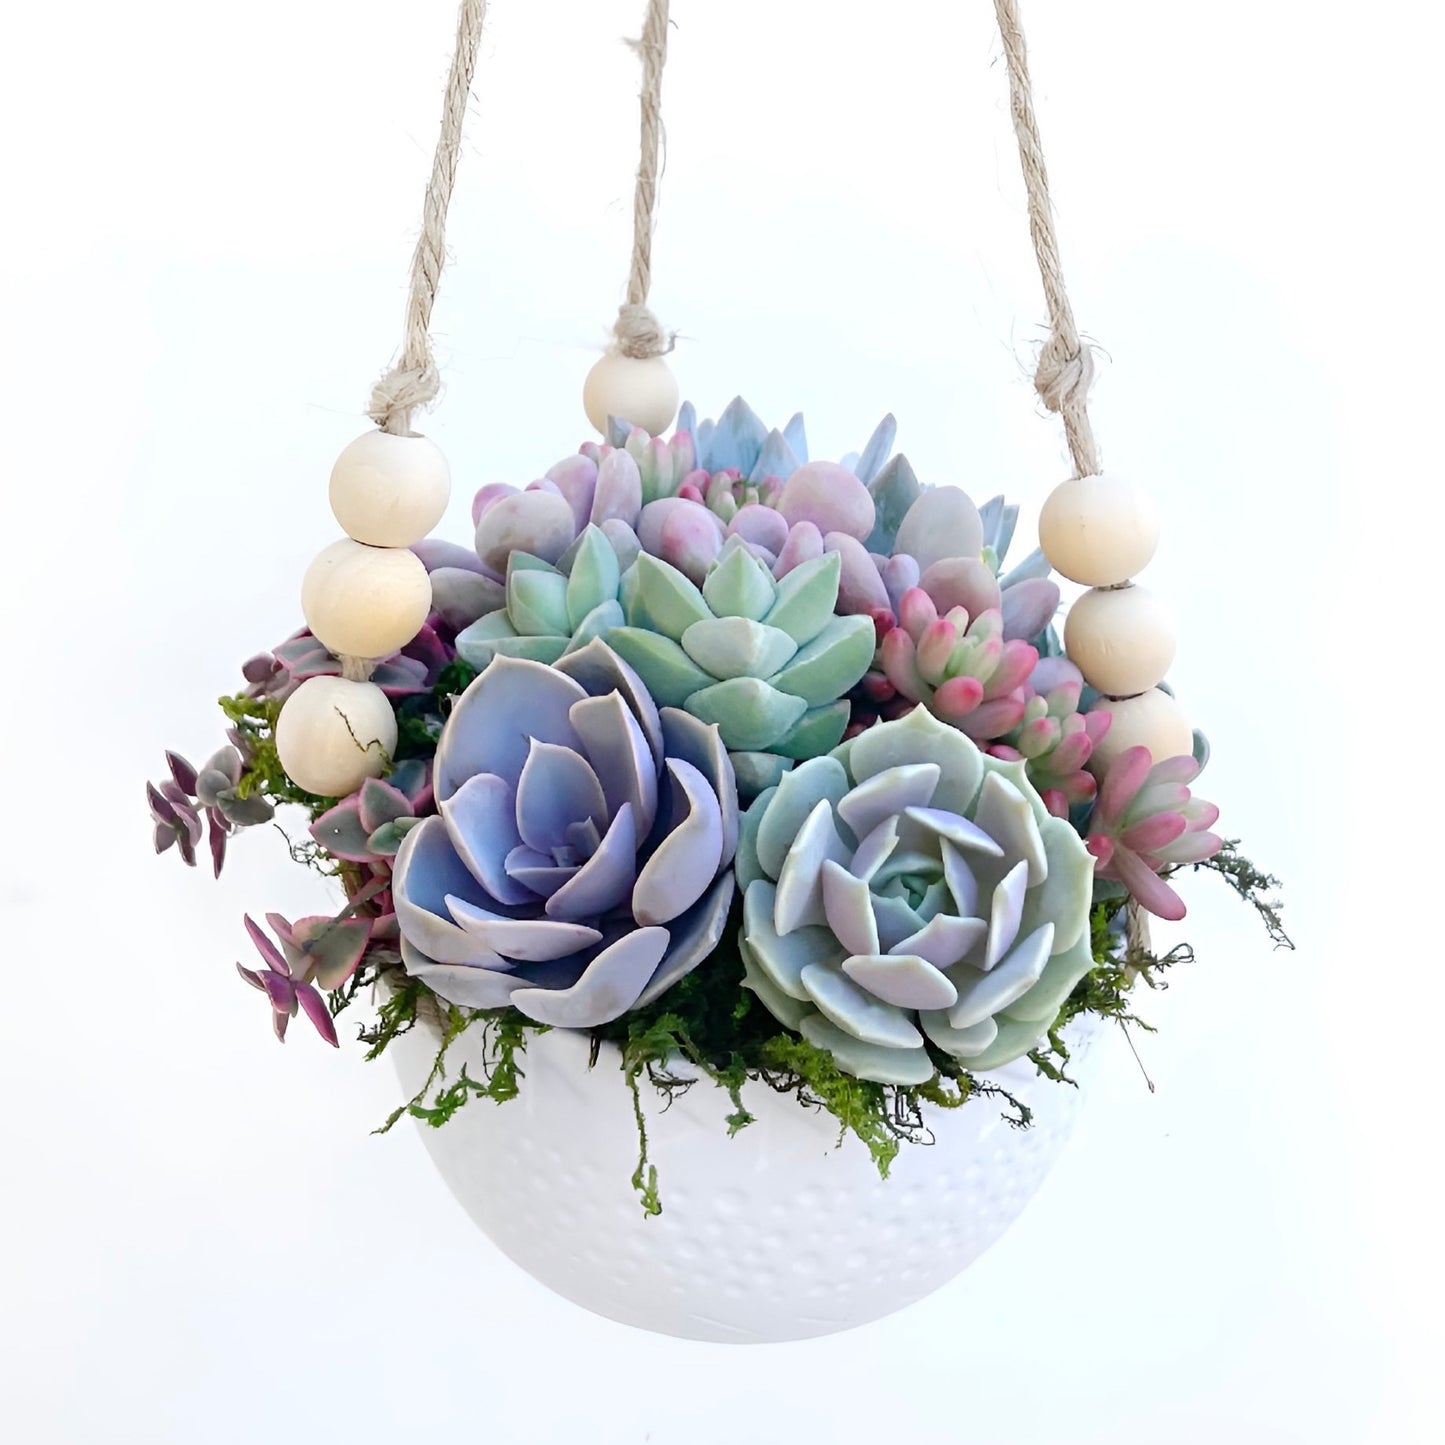 Lauren Hanging Planter Filled With Succulents